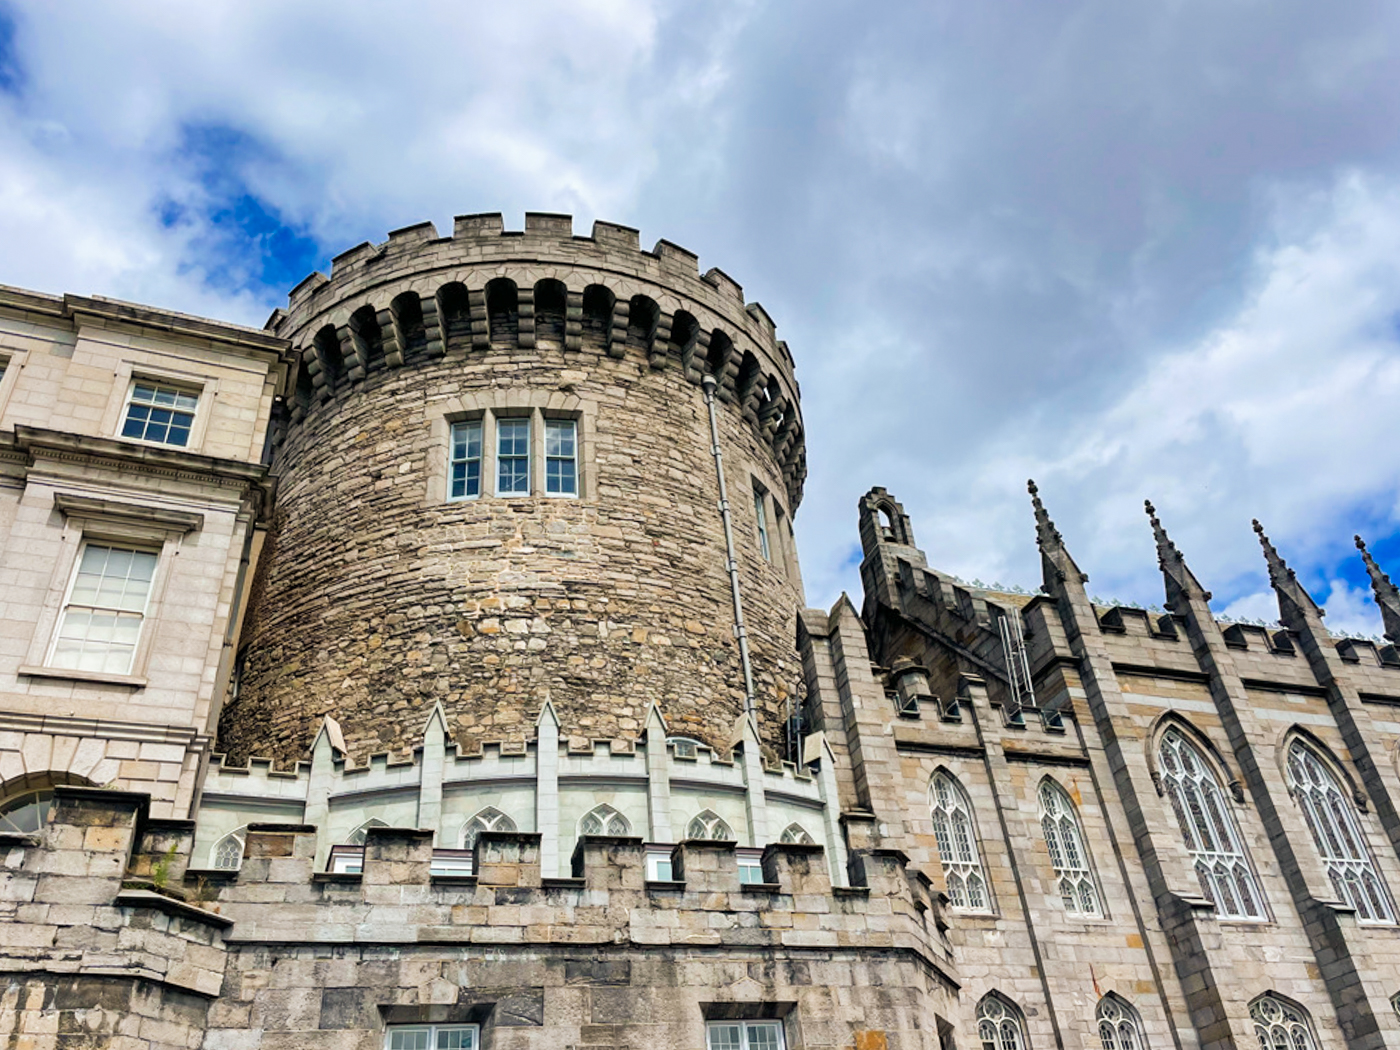 The grey stone turret of Dublin Castle peeks out through the middle of the surrounding brick buildings. Overhead, patches of blue peek out through the dense clouds in the sky.